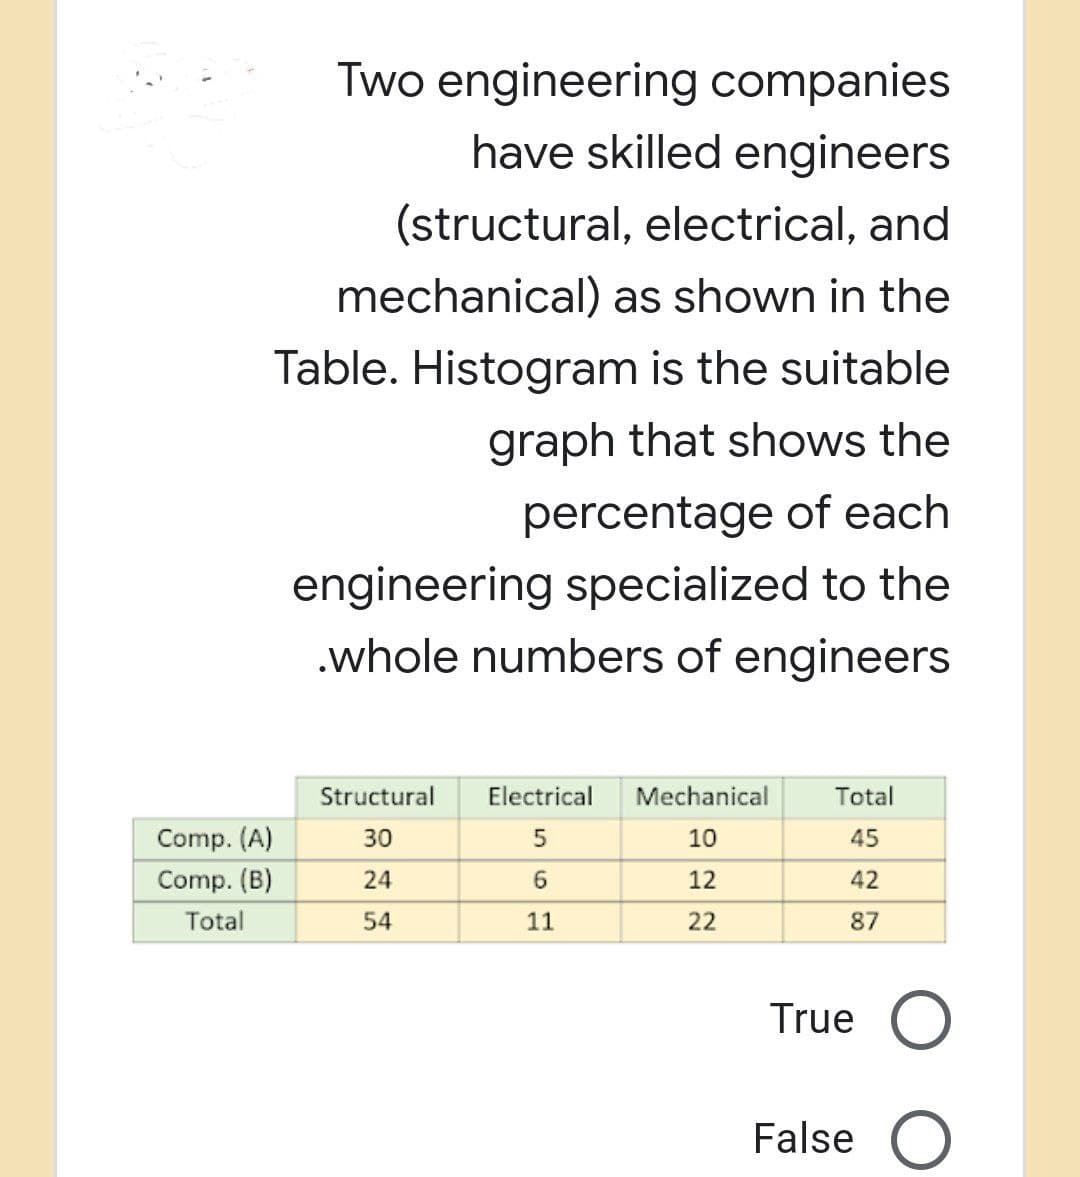 Two engineering companies
have skilled engineers
(structural, electrical, and
mechanical) as shown in the
Table. Histogram is the suitable
graph that shows the
percentage of each
engineering specialized to the
.whole numbers of engineers
Comp. (A)
Comp. (B)
Total
Structural
30
24
54
Electrical Mechanical
5
10
6
12
11
22
Total
45
42
87
True O
O
False